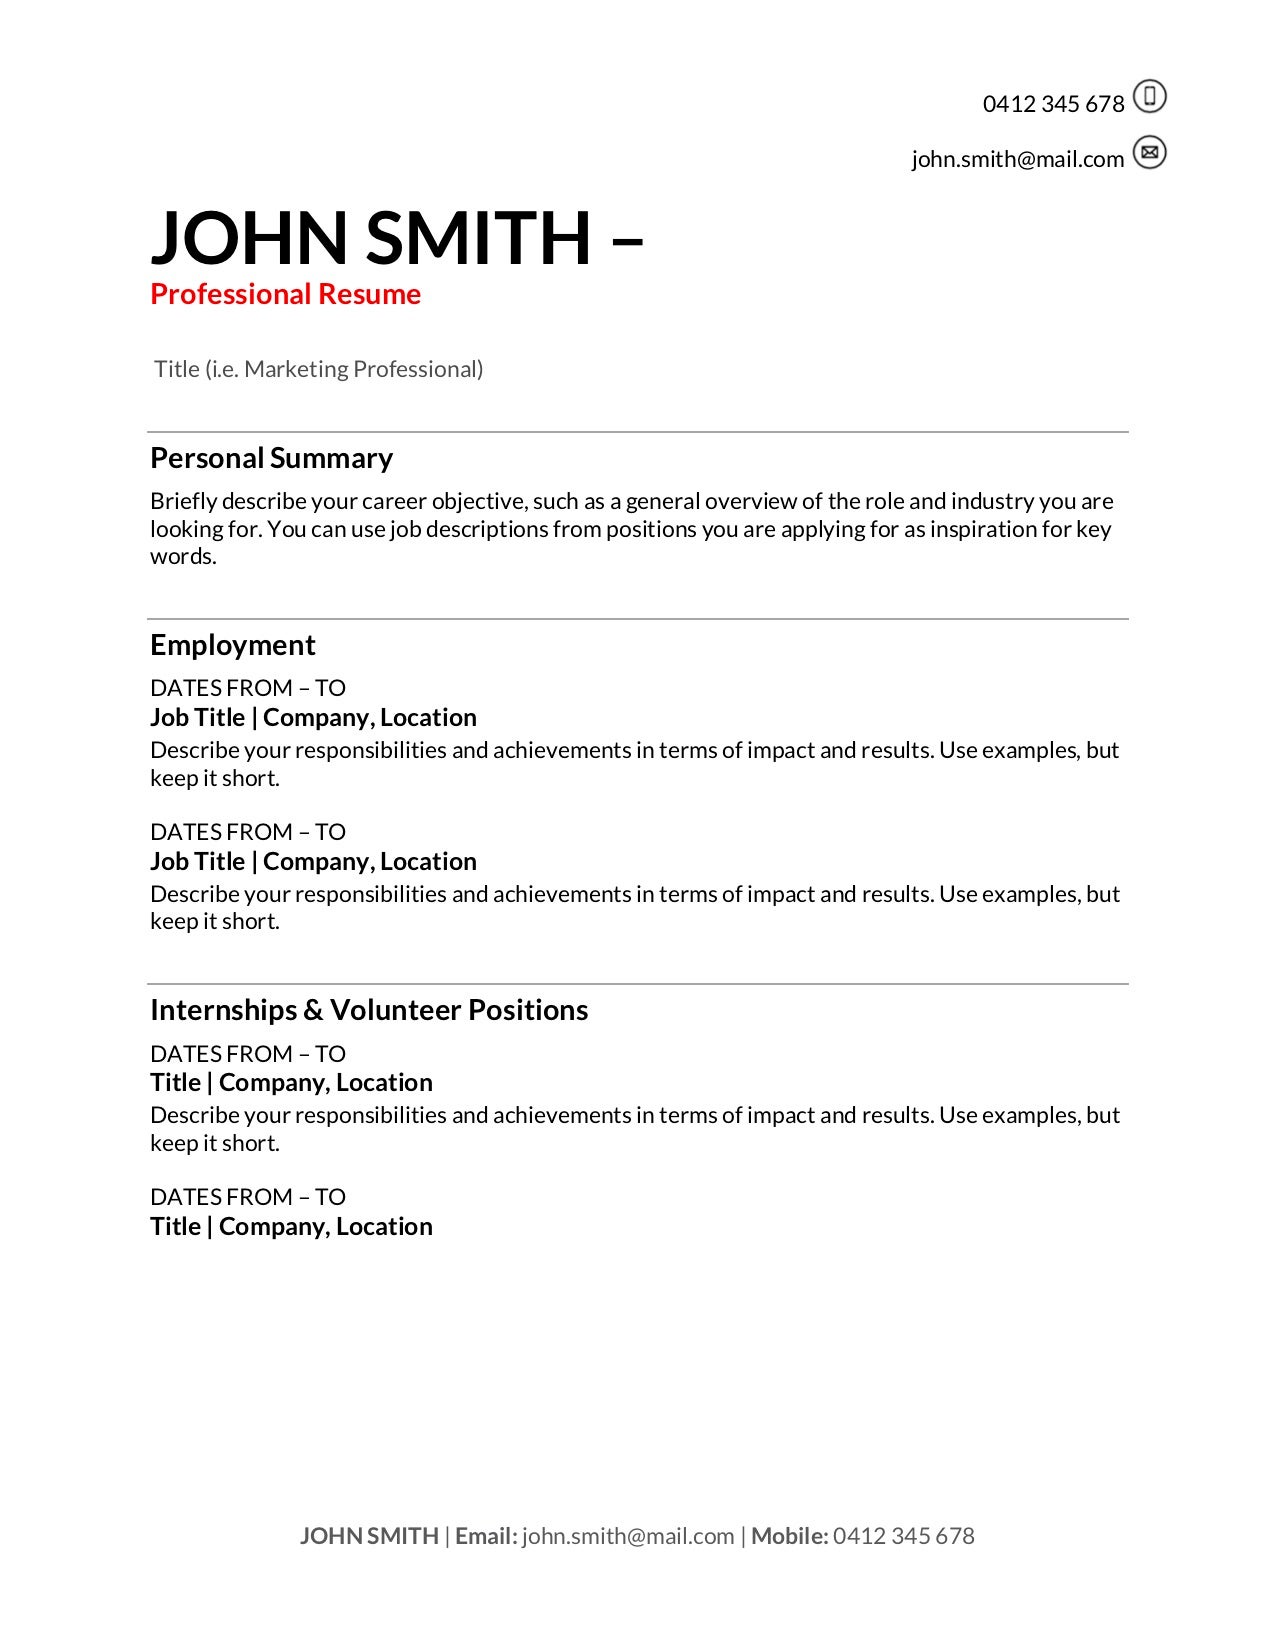 Free Resume Templates [Download]: How to Write a Resume in 27